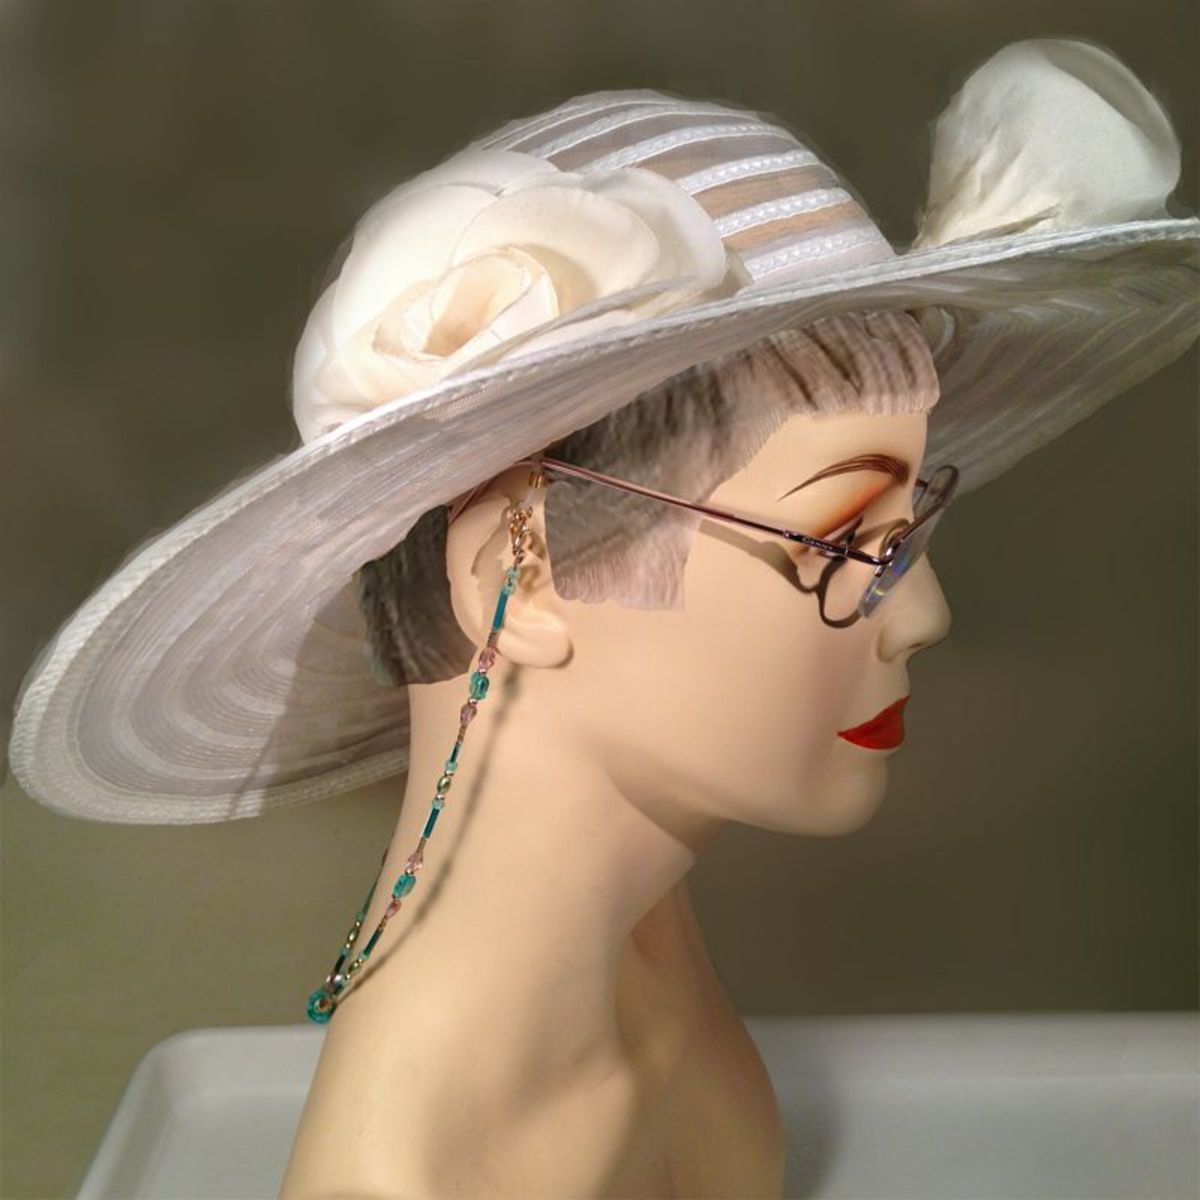 The finished beaded eyeglass chain displayed with glasses on a mannequin